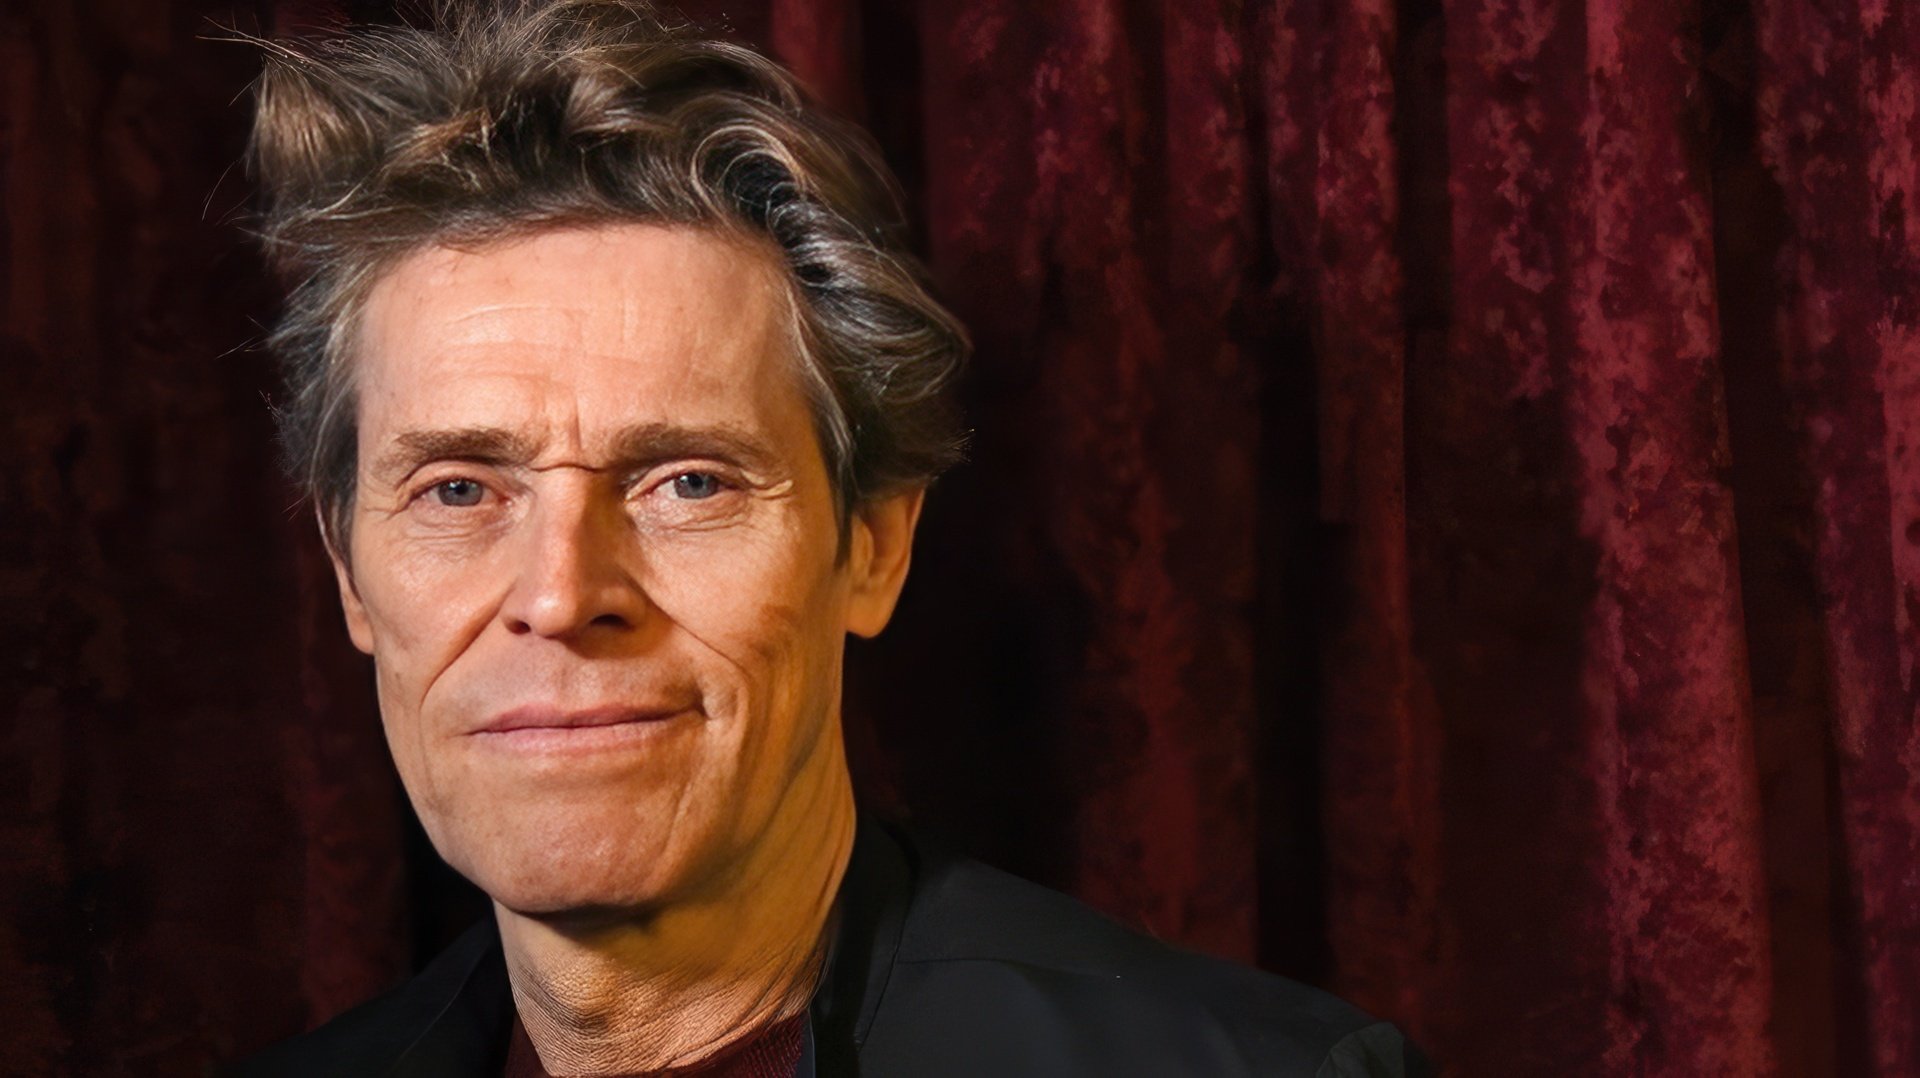 William Dafoe was and remains a sought-after actor